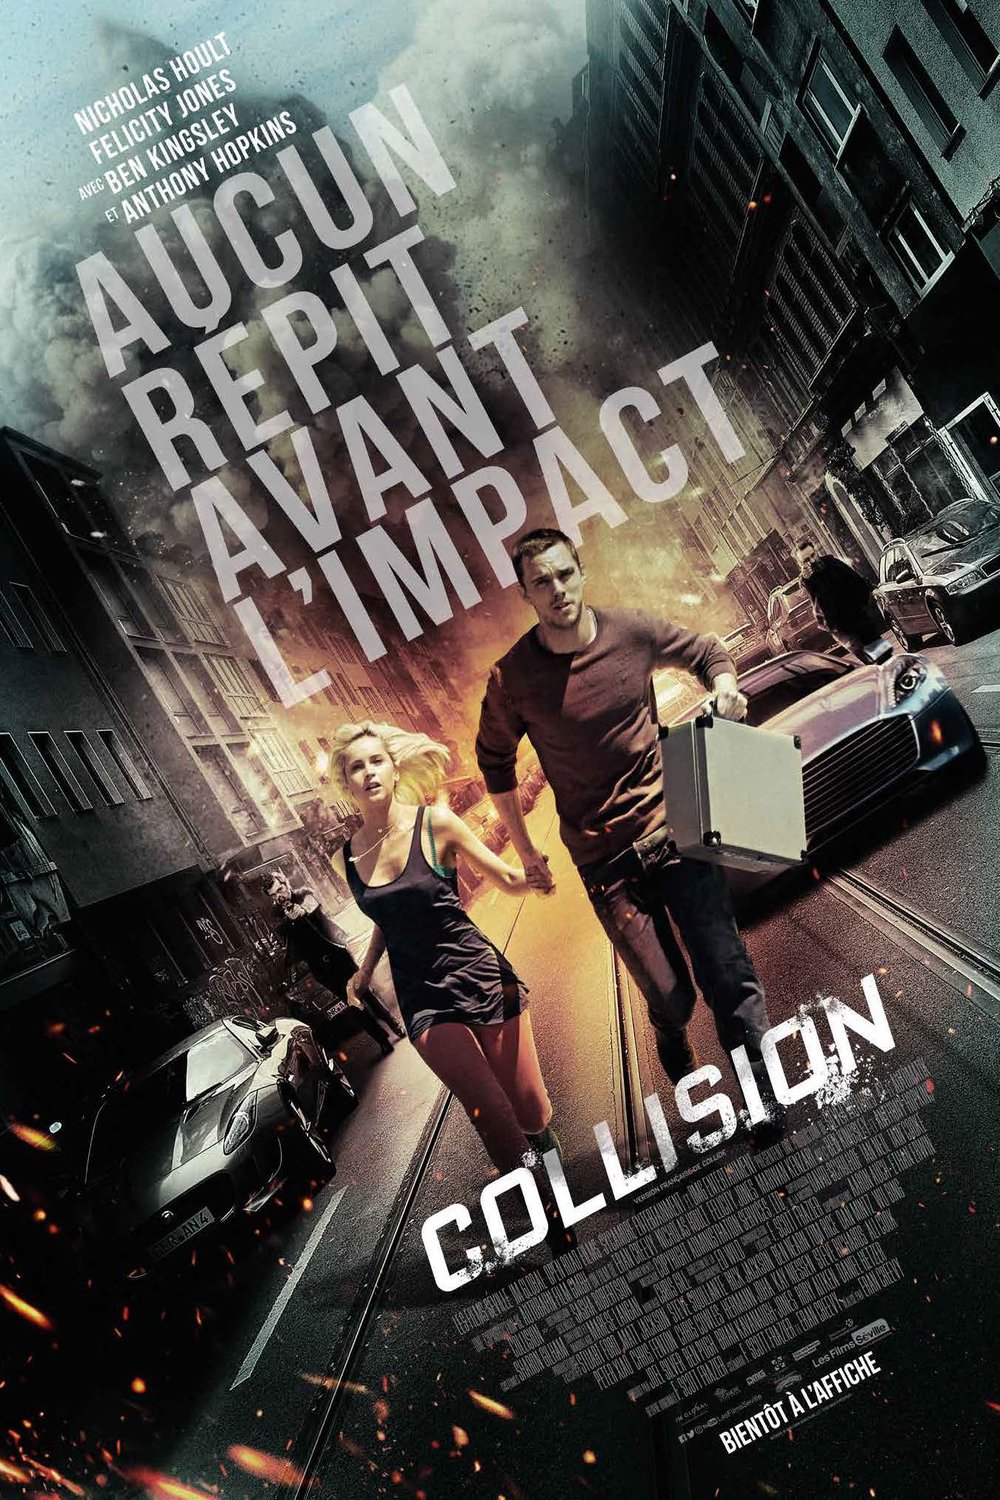 Poster of the movie Collision